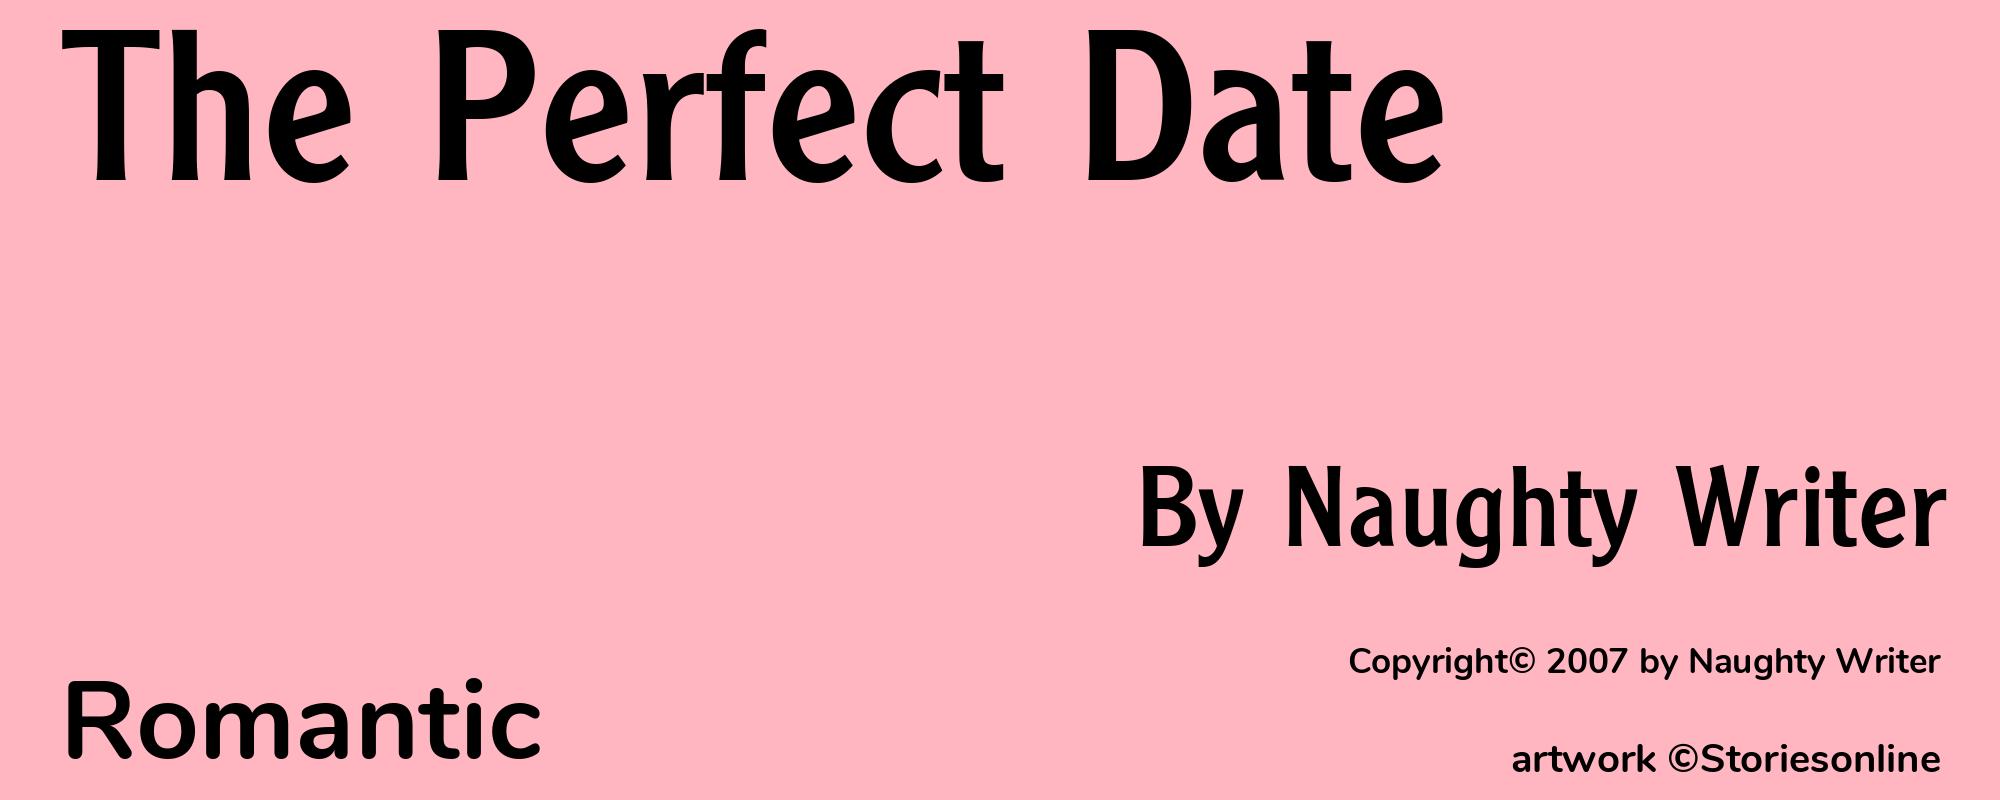 The Perfect Date - Cover